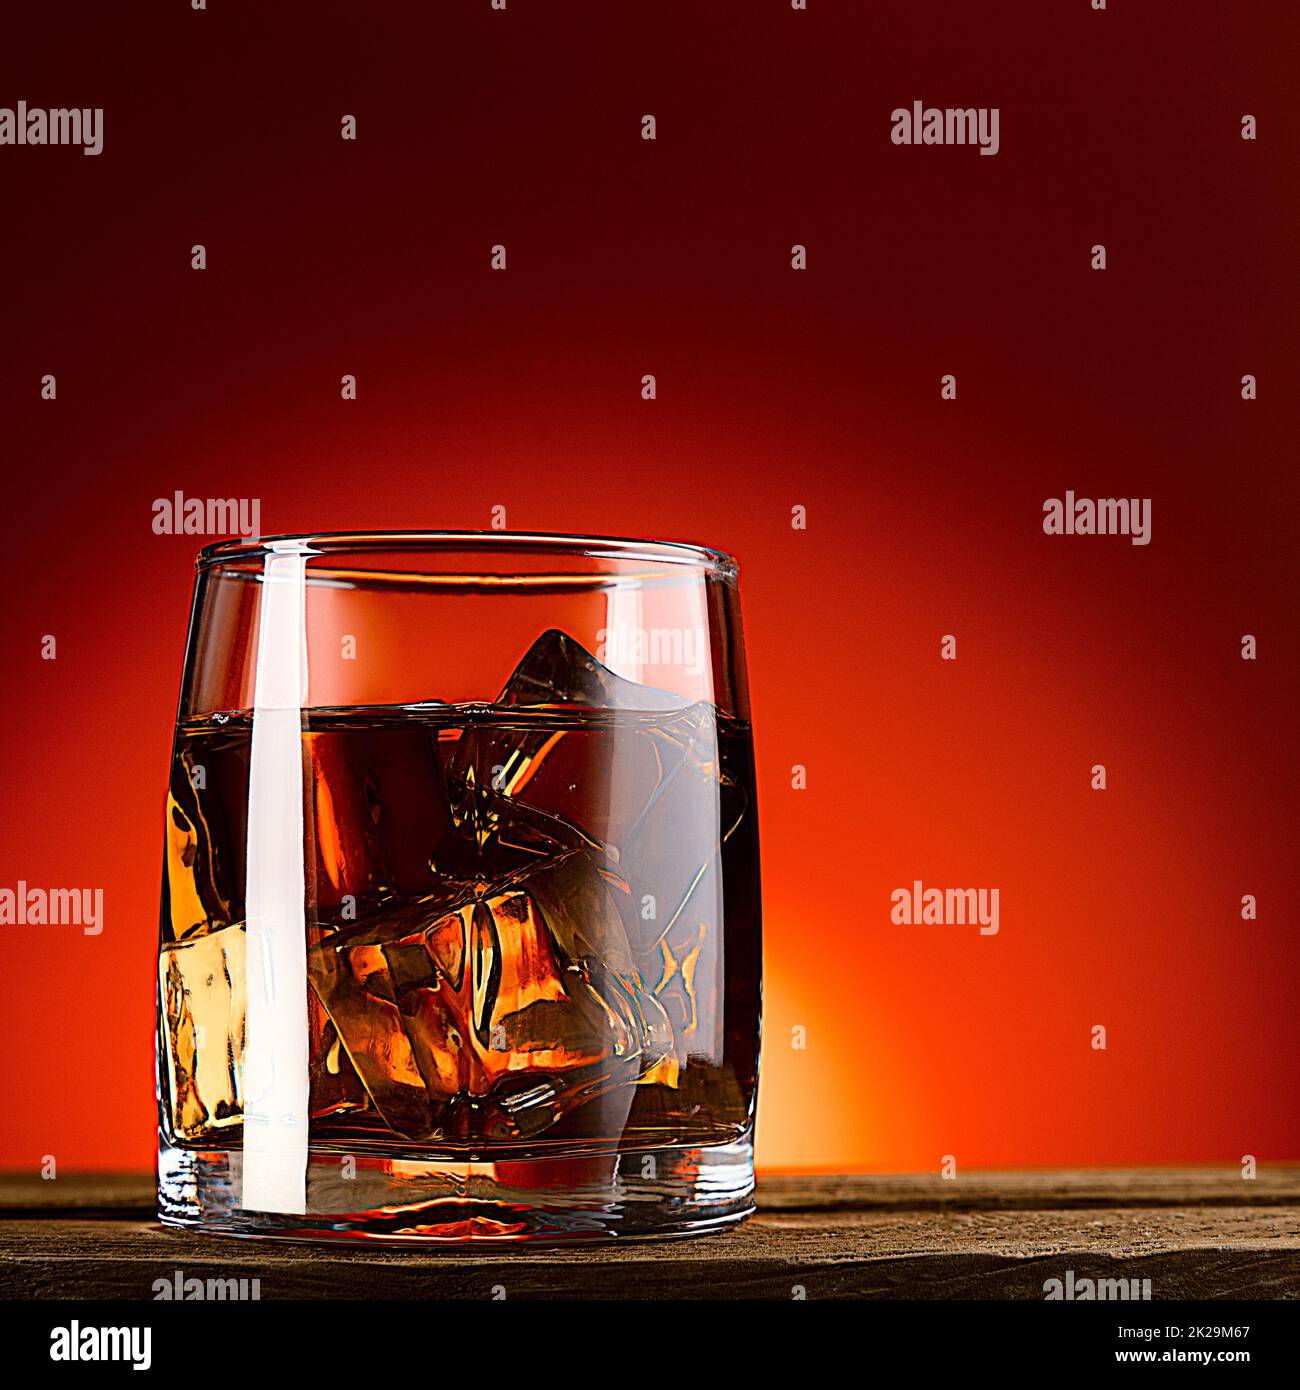 A glass of whiskey or cognac and ice cubes, close-up on a wooden table. Red background with gradient. Stock Photo